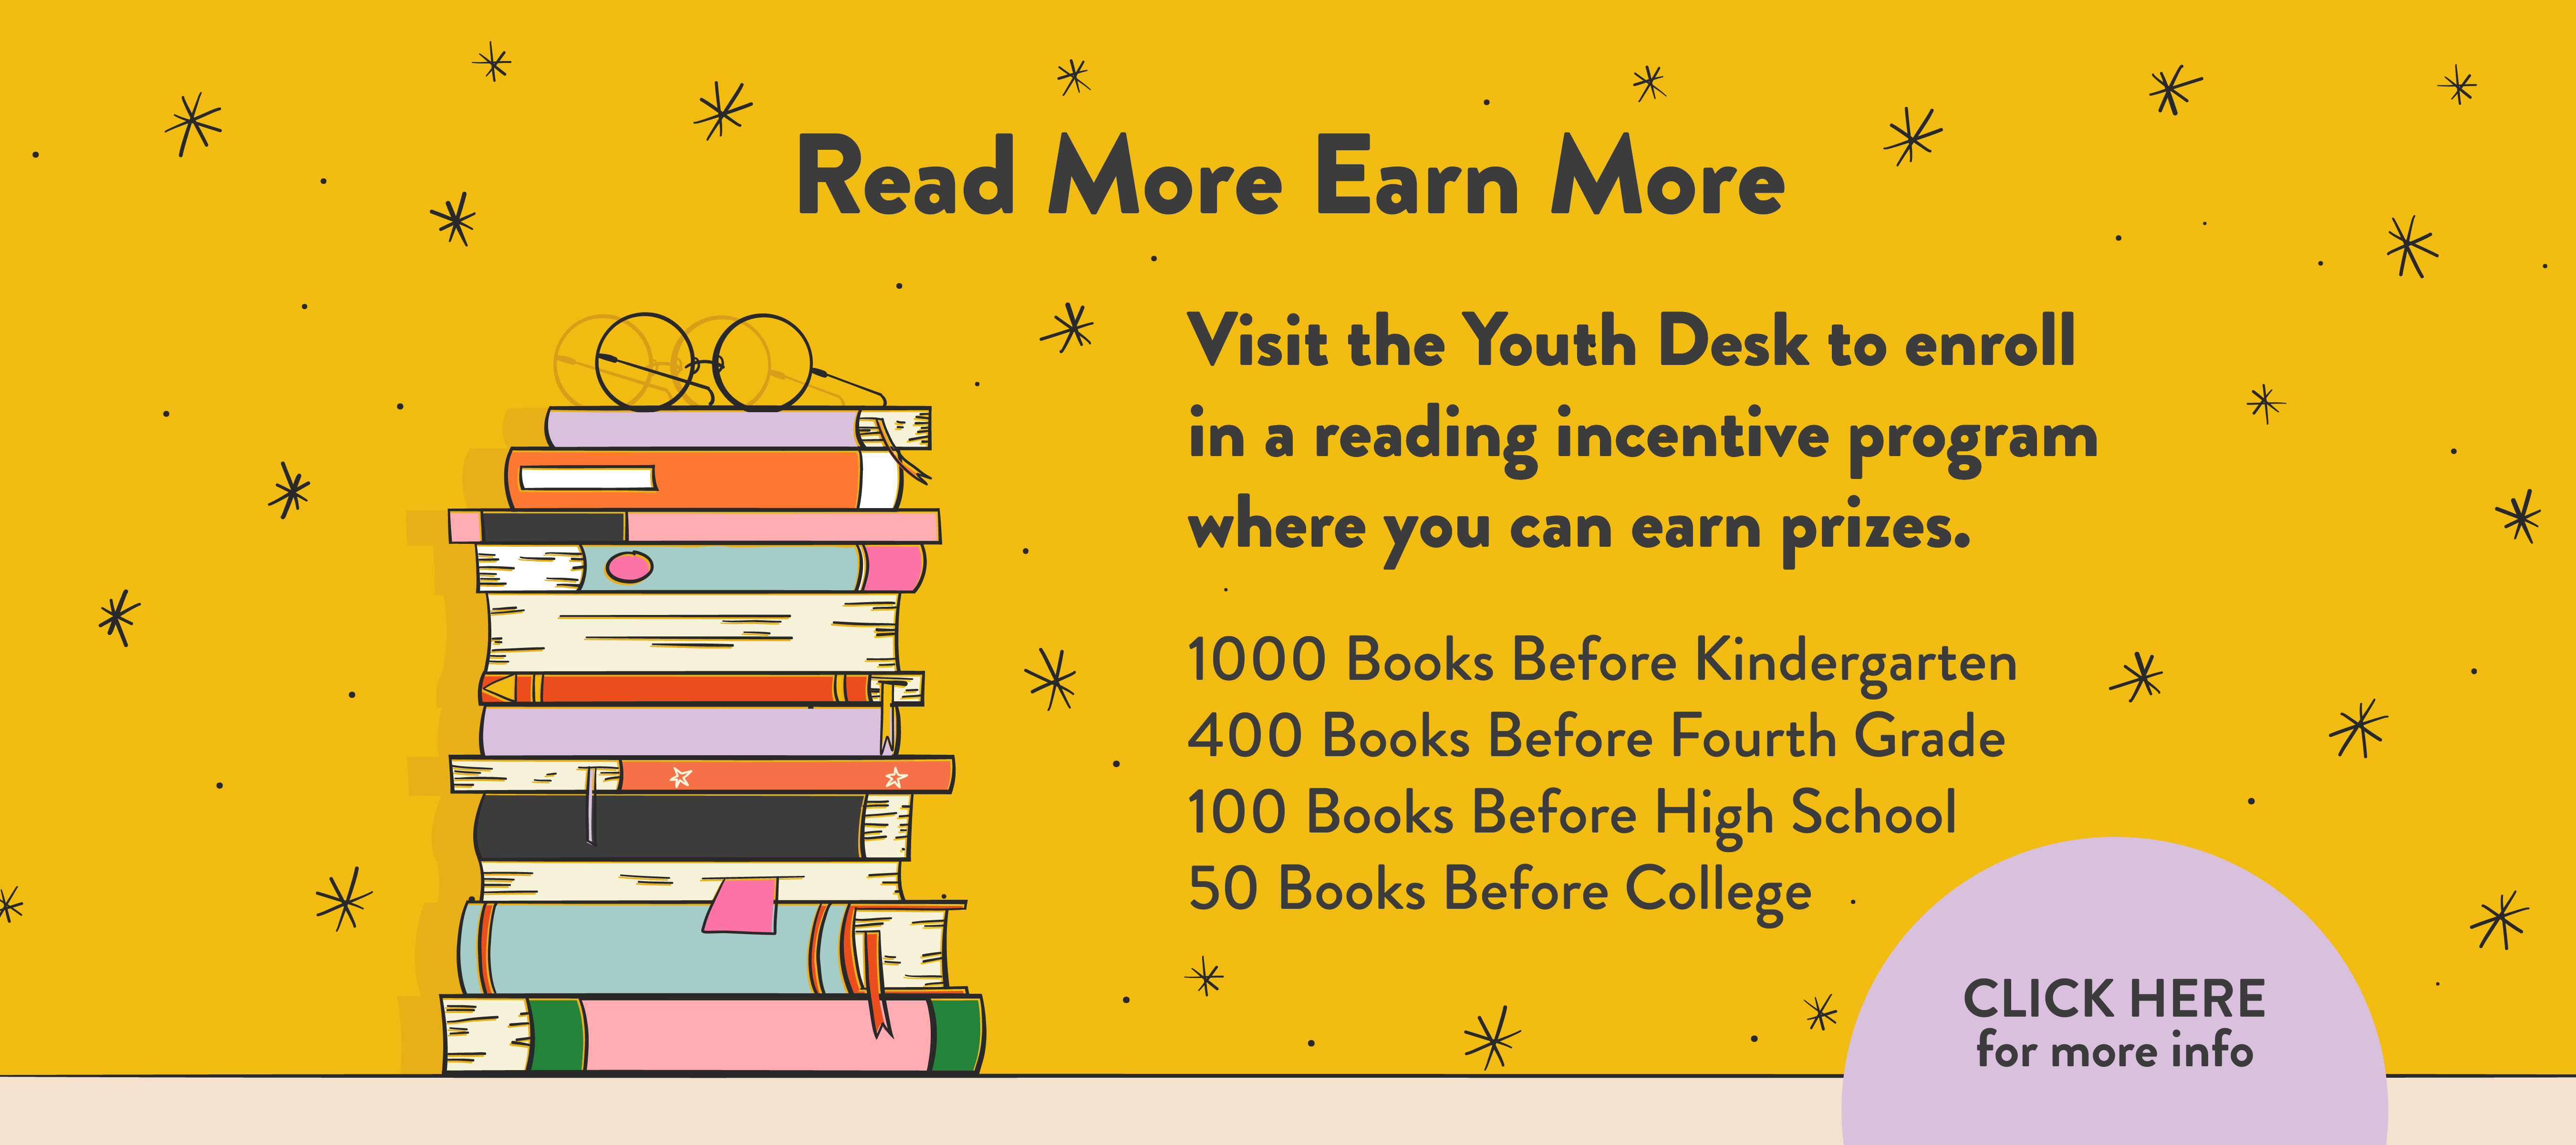 phpl, Prospect Heights Public Library, Read More Earn More, 1000 Books Before Kindergarten, 400 Books Before fourth Grade, 100 Books Before High School, 50 Books Before College, reading incentives, reading program, Youth, Teen